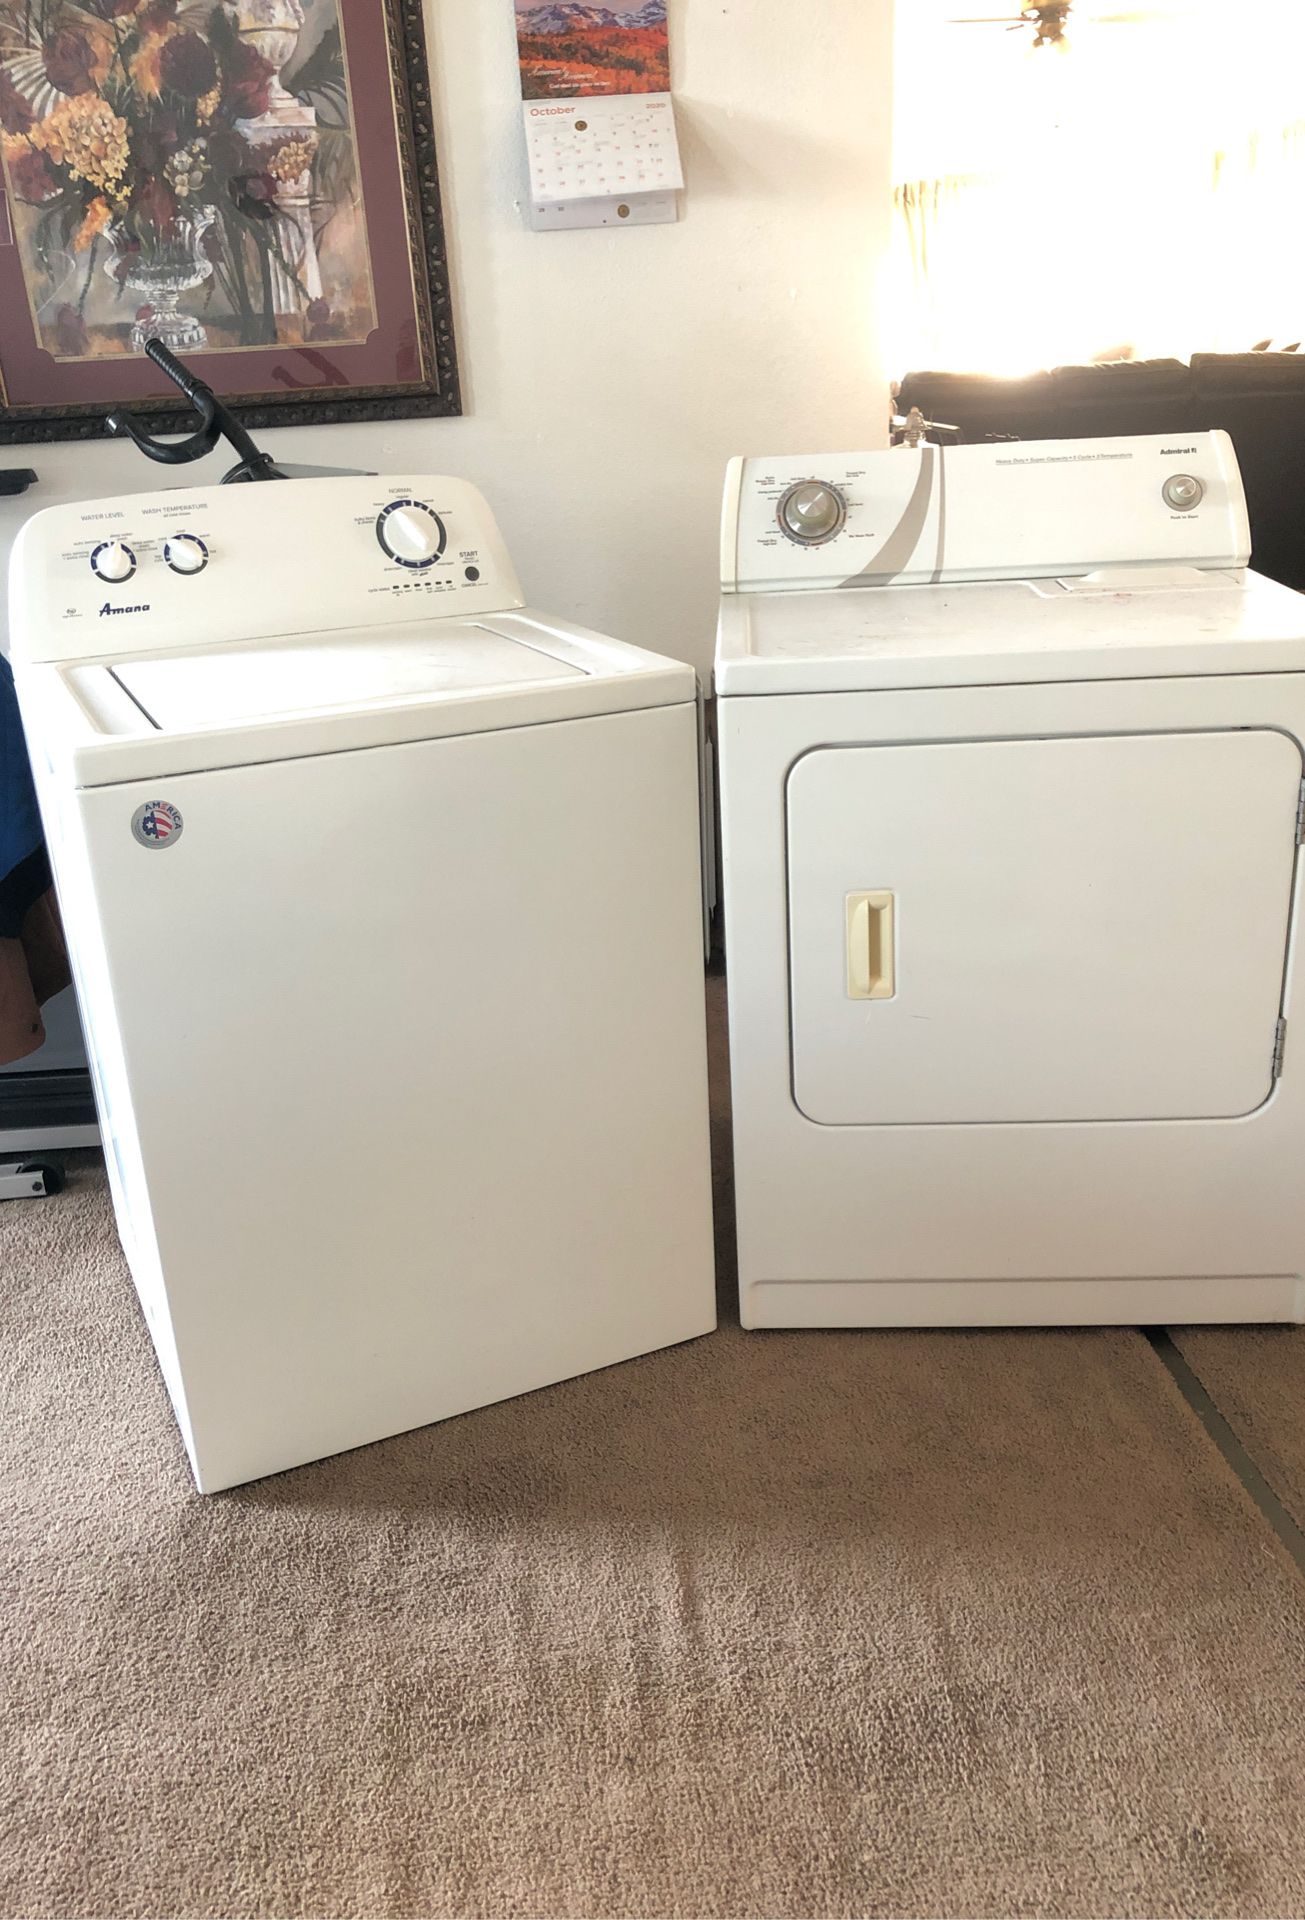 Washing machine is Amana and it’s 2 years old. Dryer is Admiral, both of them work great, I graduated and bought another set with pedestals